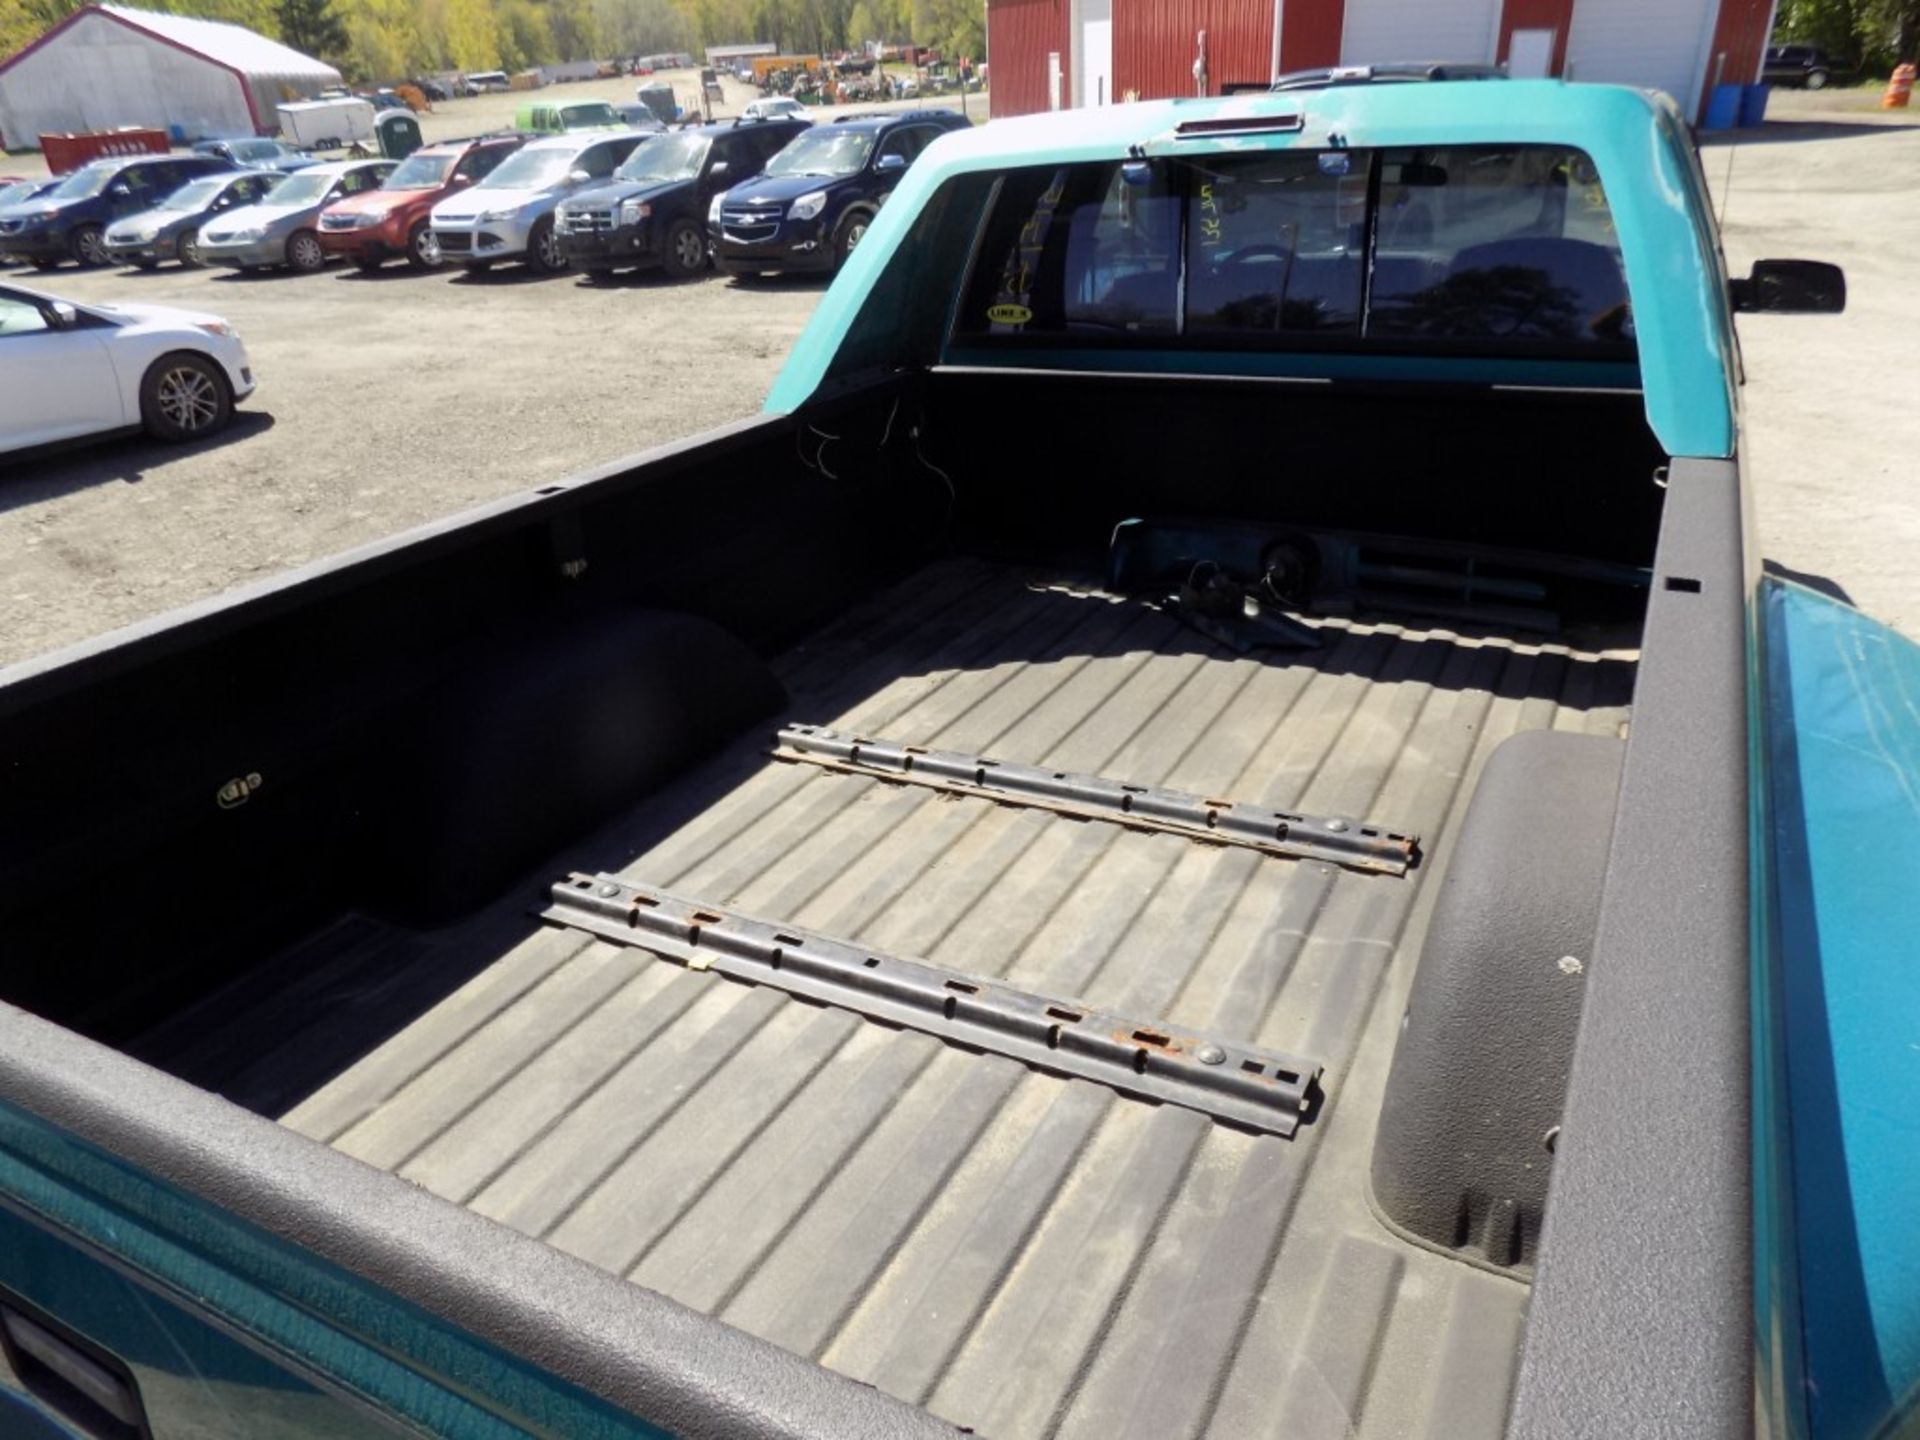 1996 Chevrolet Silverado 3500 Ext. Cab, 2 WD Diesel, Centurion Conversion Package with Leather, - Image 4 of 5